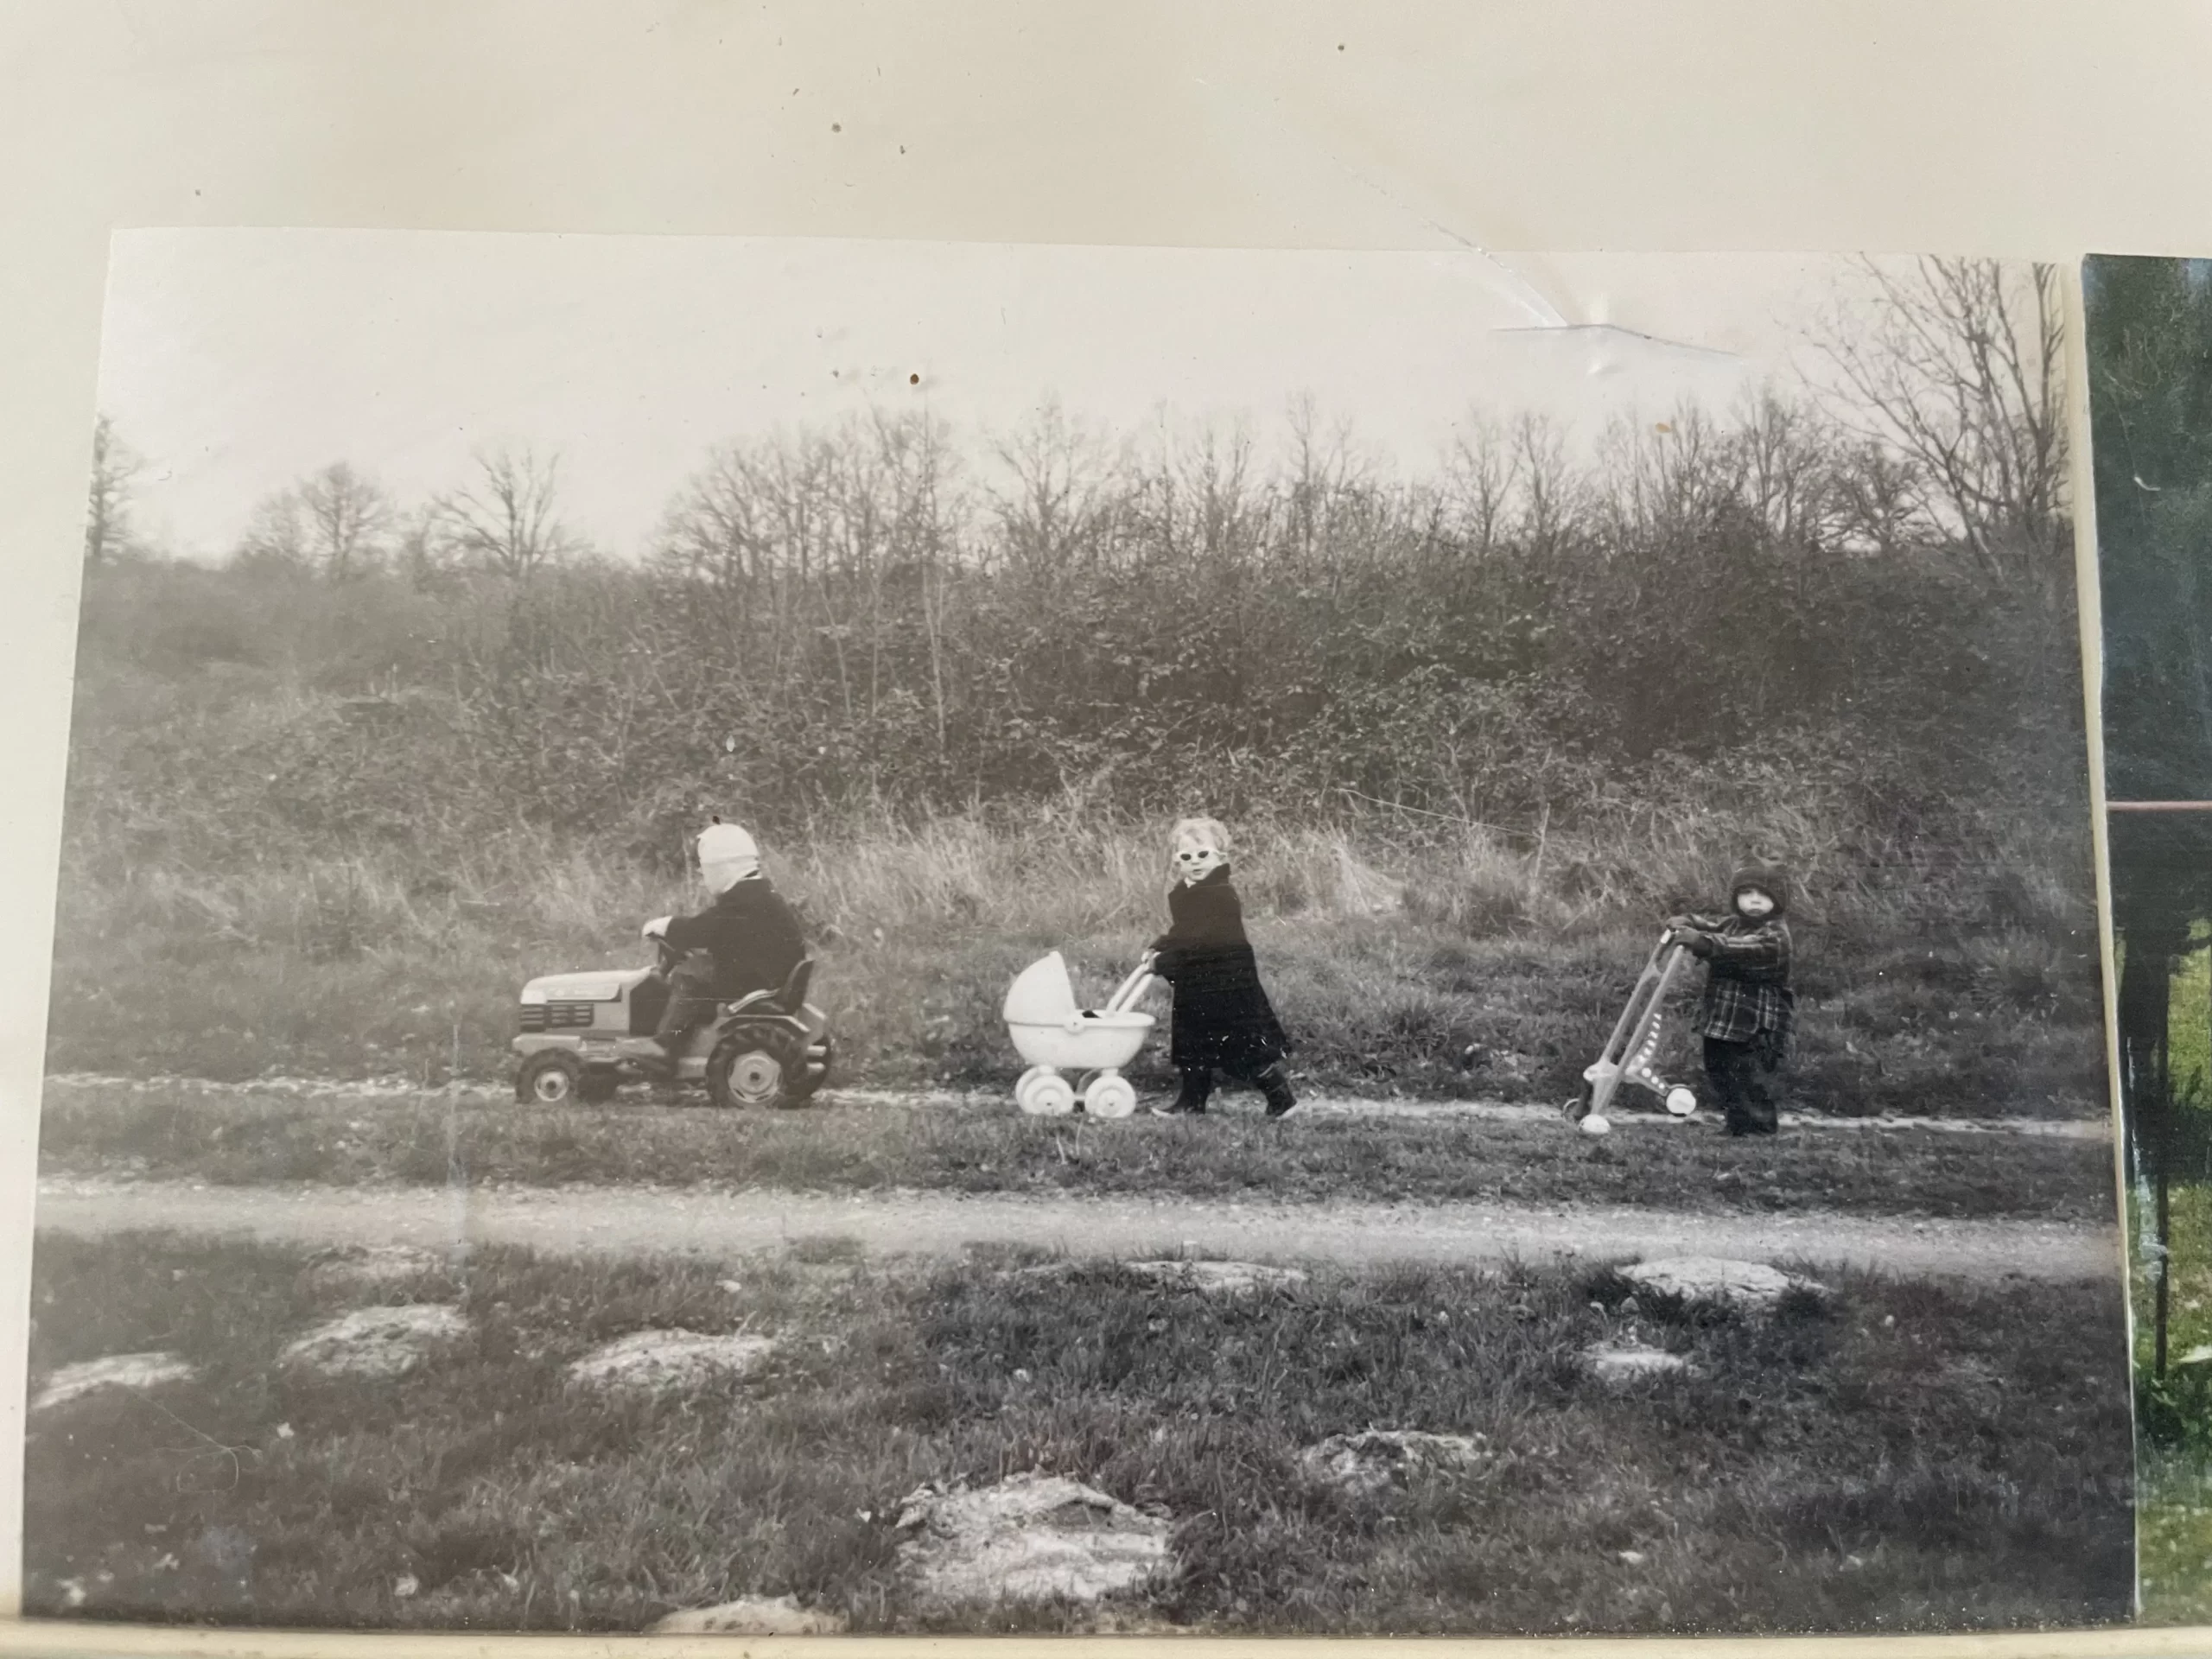 Three children walking along a countrypath. Frist child on a tractor in a hat very concentrated. Second child, female pushing a pram and is looking at the camera - has sunglasses on. Third child, male, is lifting the pushchair and stopped.